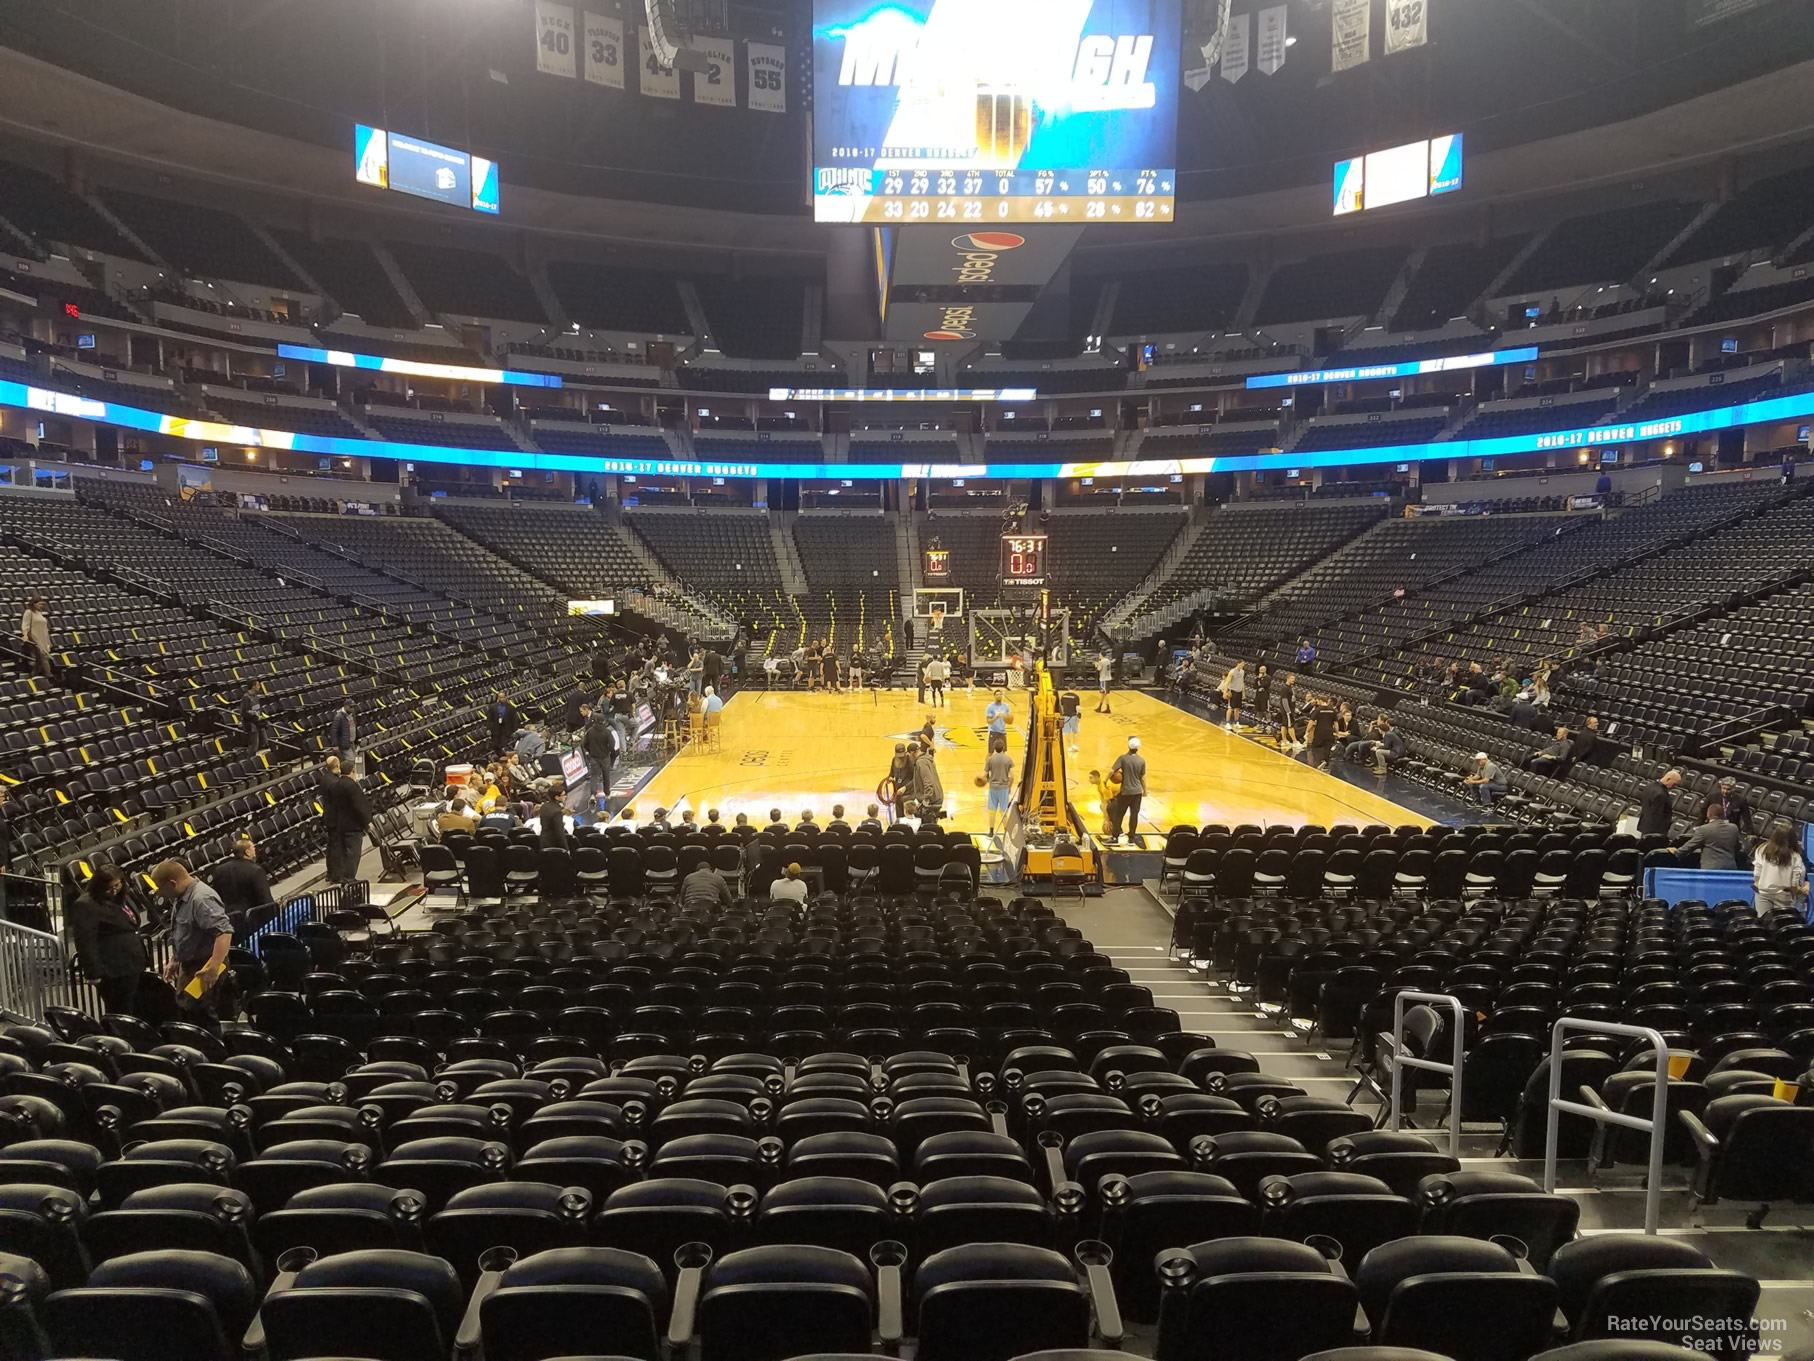 section 138, row 11 seat view  for basketball - ball arena